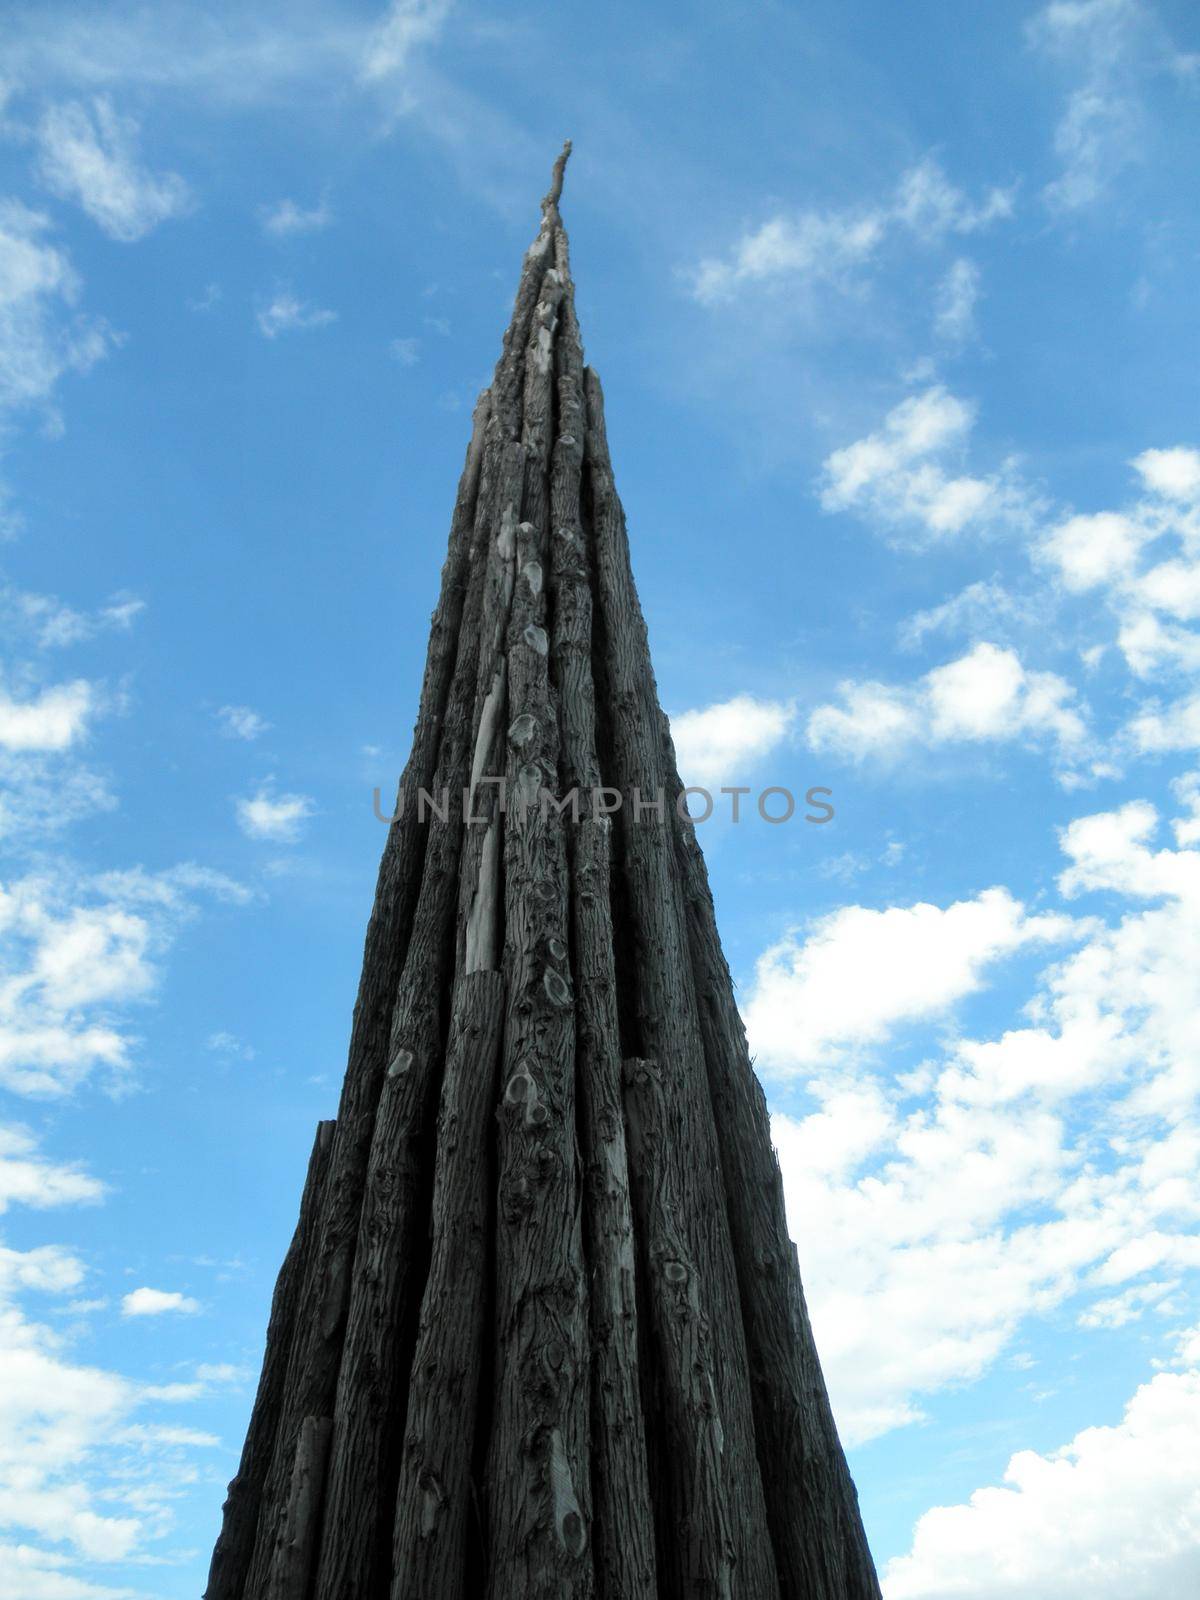 San Francisco, California - October 1, 2010:  Standing at 100 feet tall at its tapering peak, Spire is a sculpture by world-renowned artist Andy Goldsworthy.  in 2008 Goldsworthy selected 37 Monterey cypress trunks from trees felled at the site and meticulously fastened them together. 